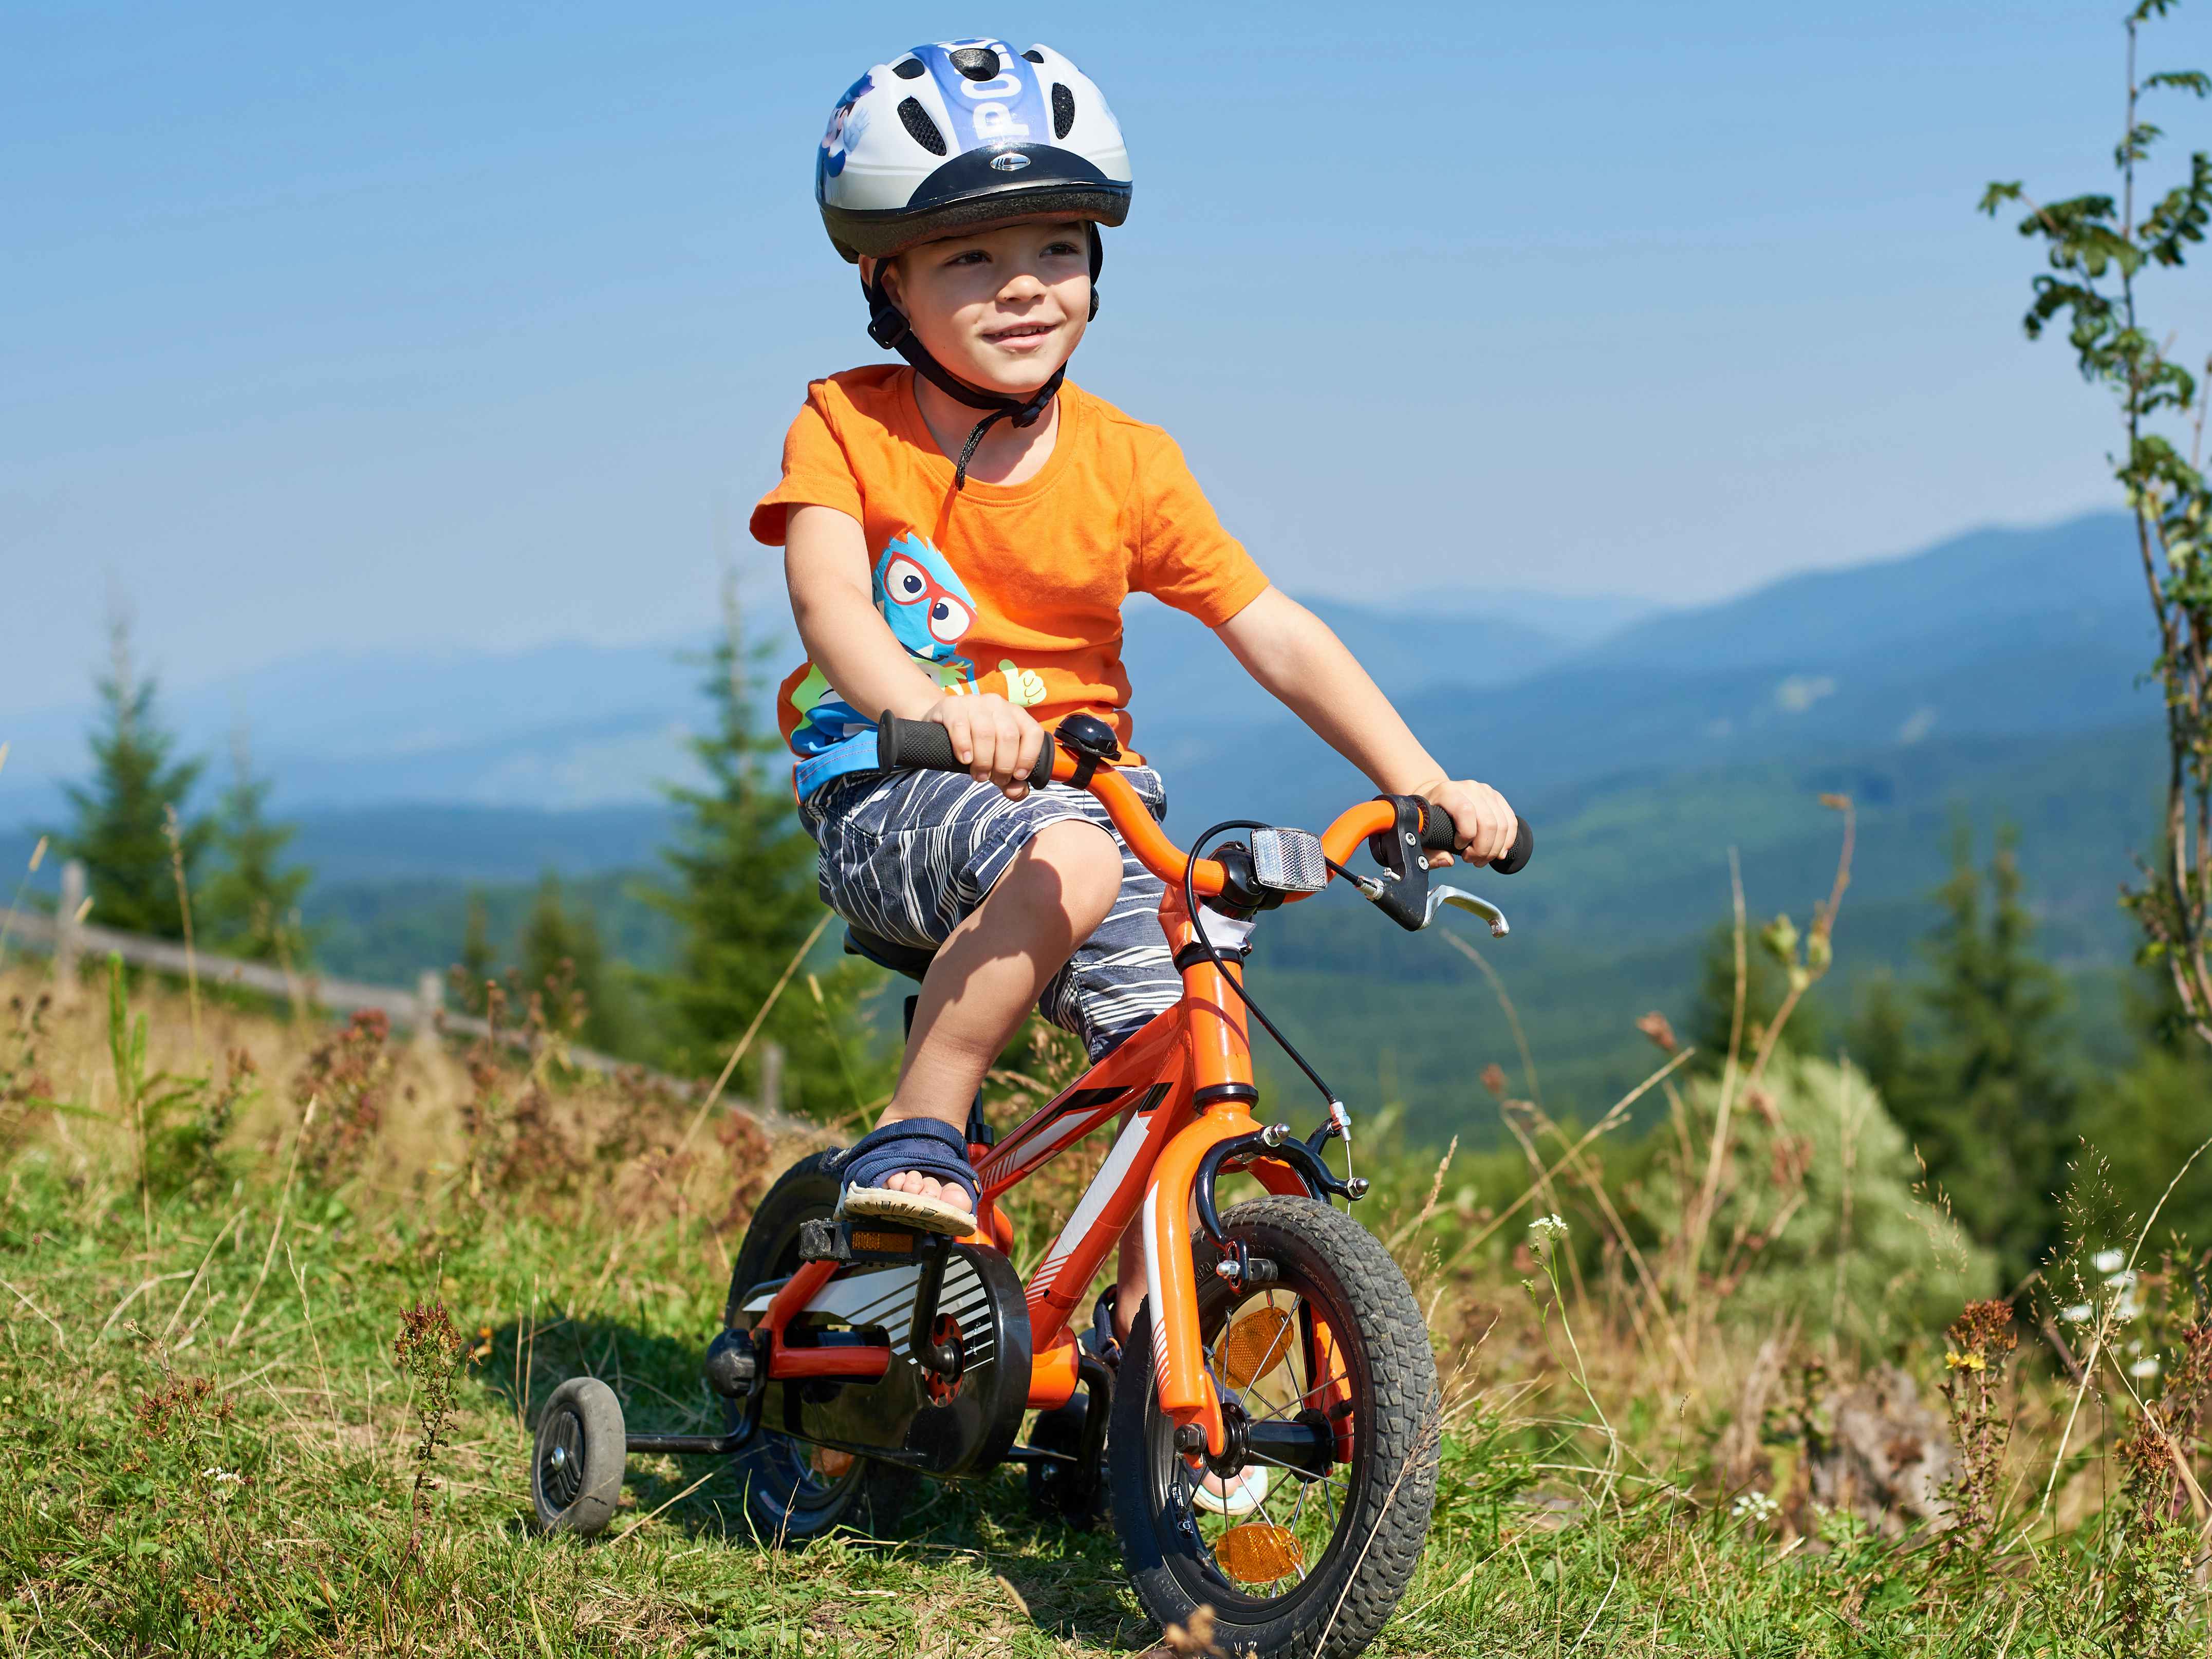 a child riding on a bike wearing a helmet